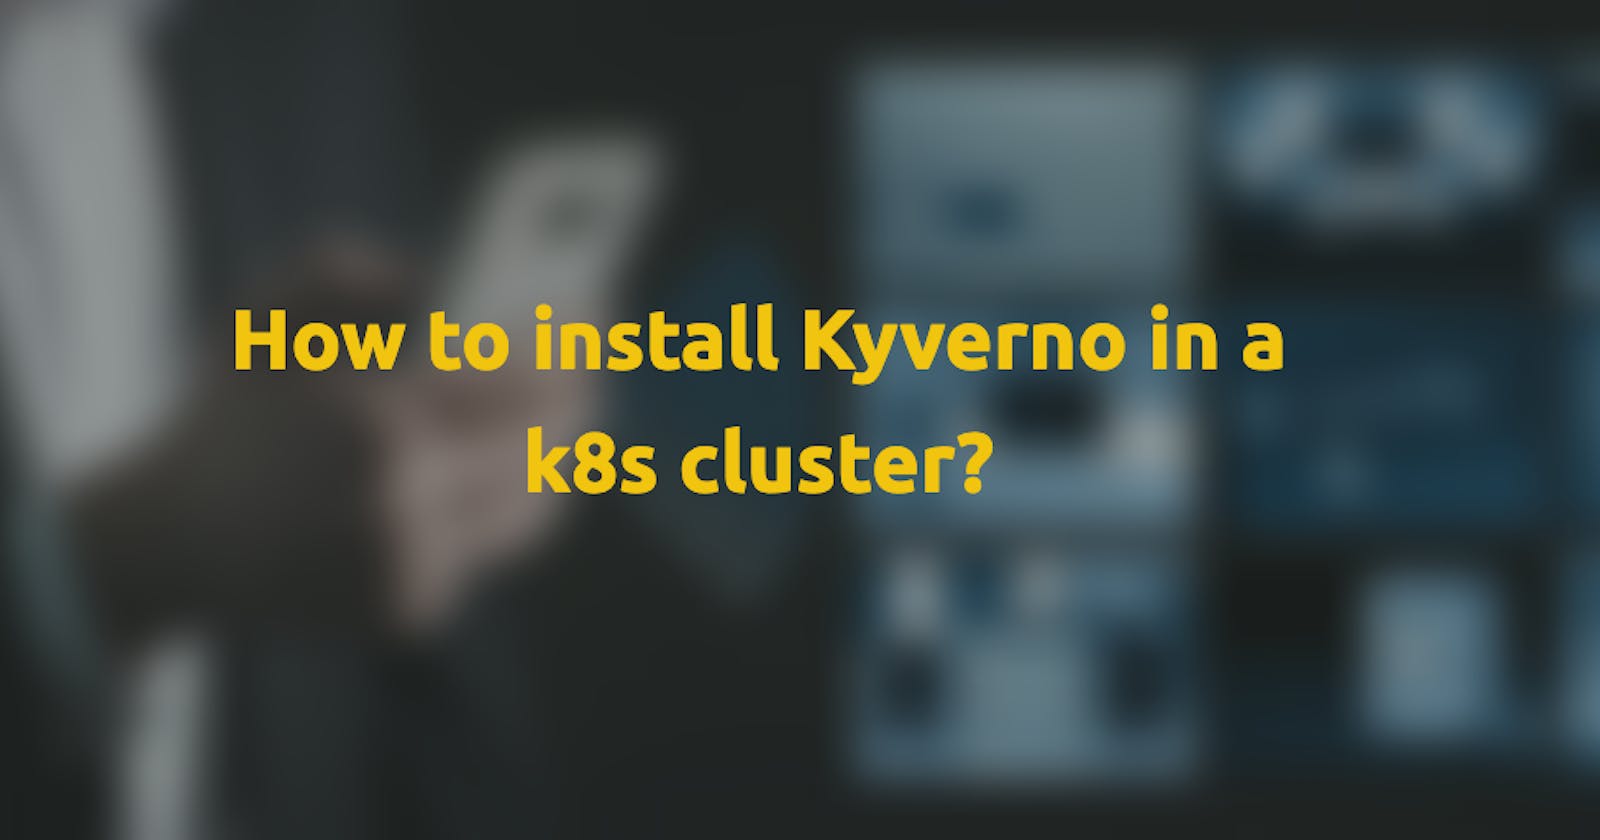 How to install Kyverno in a k8s cluster?